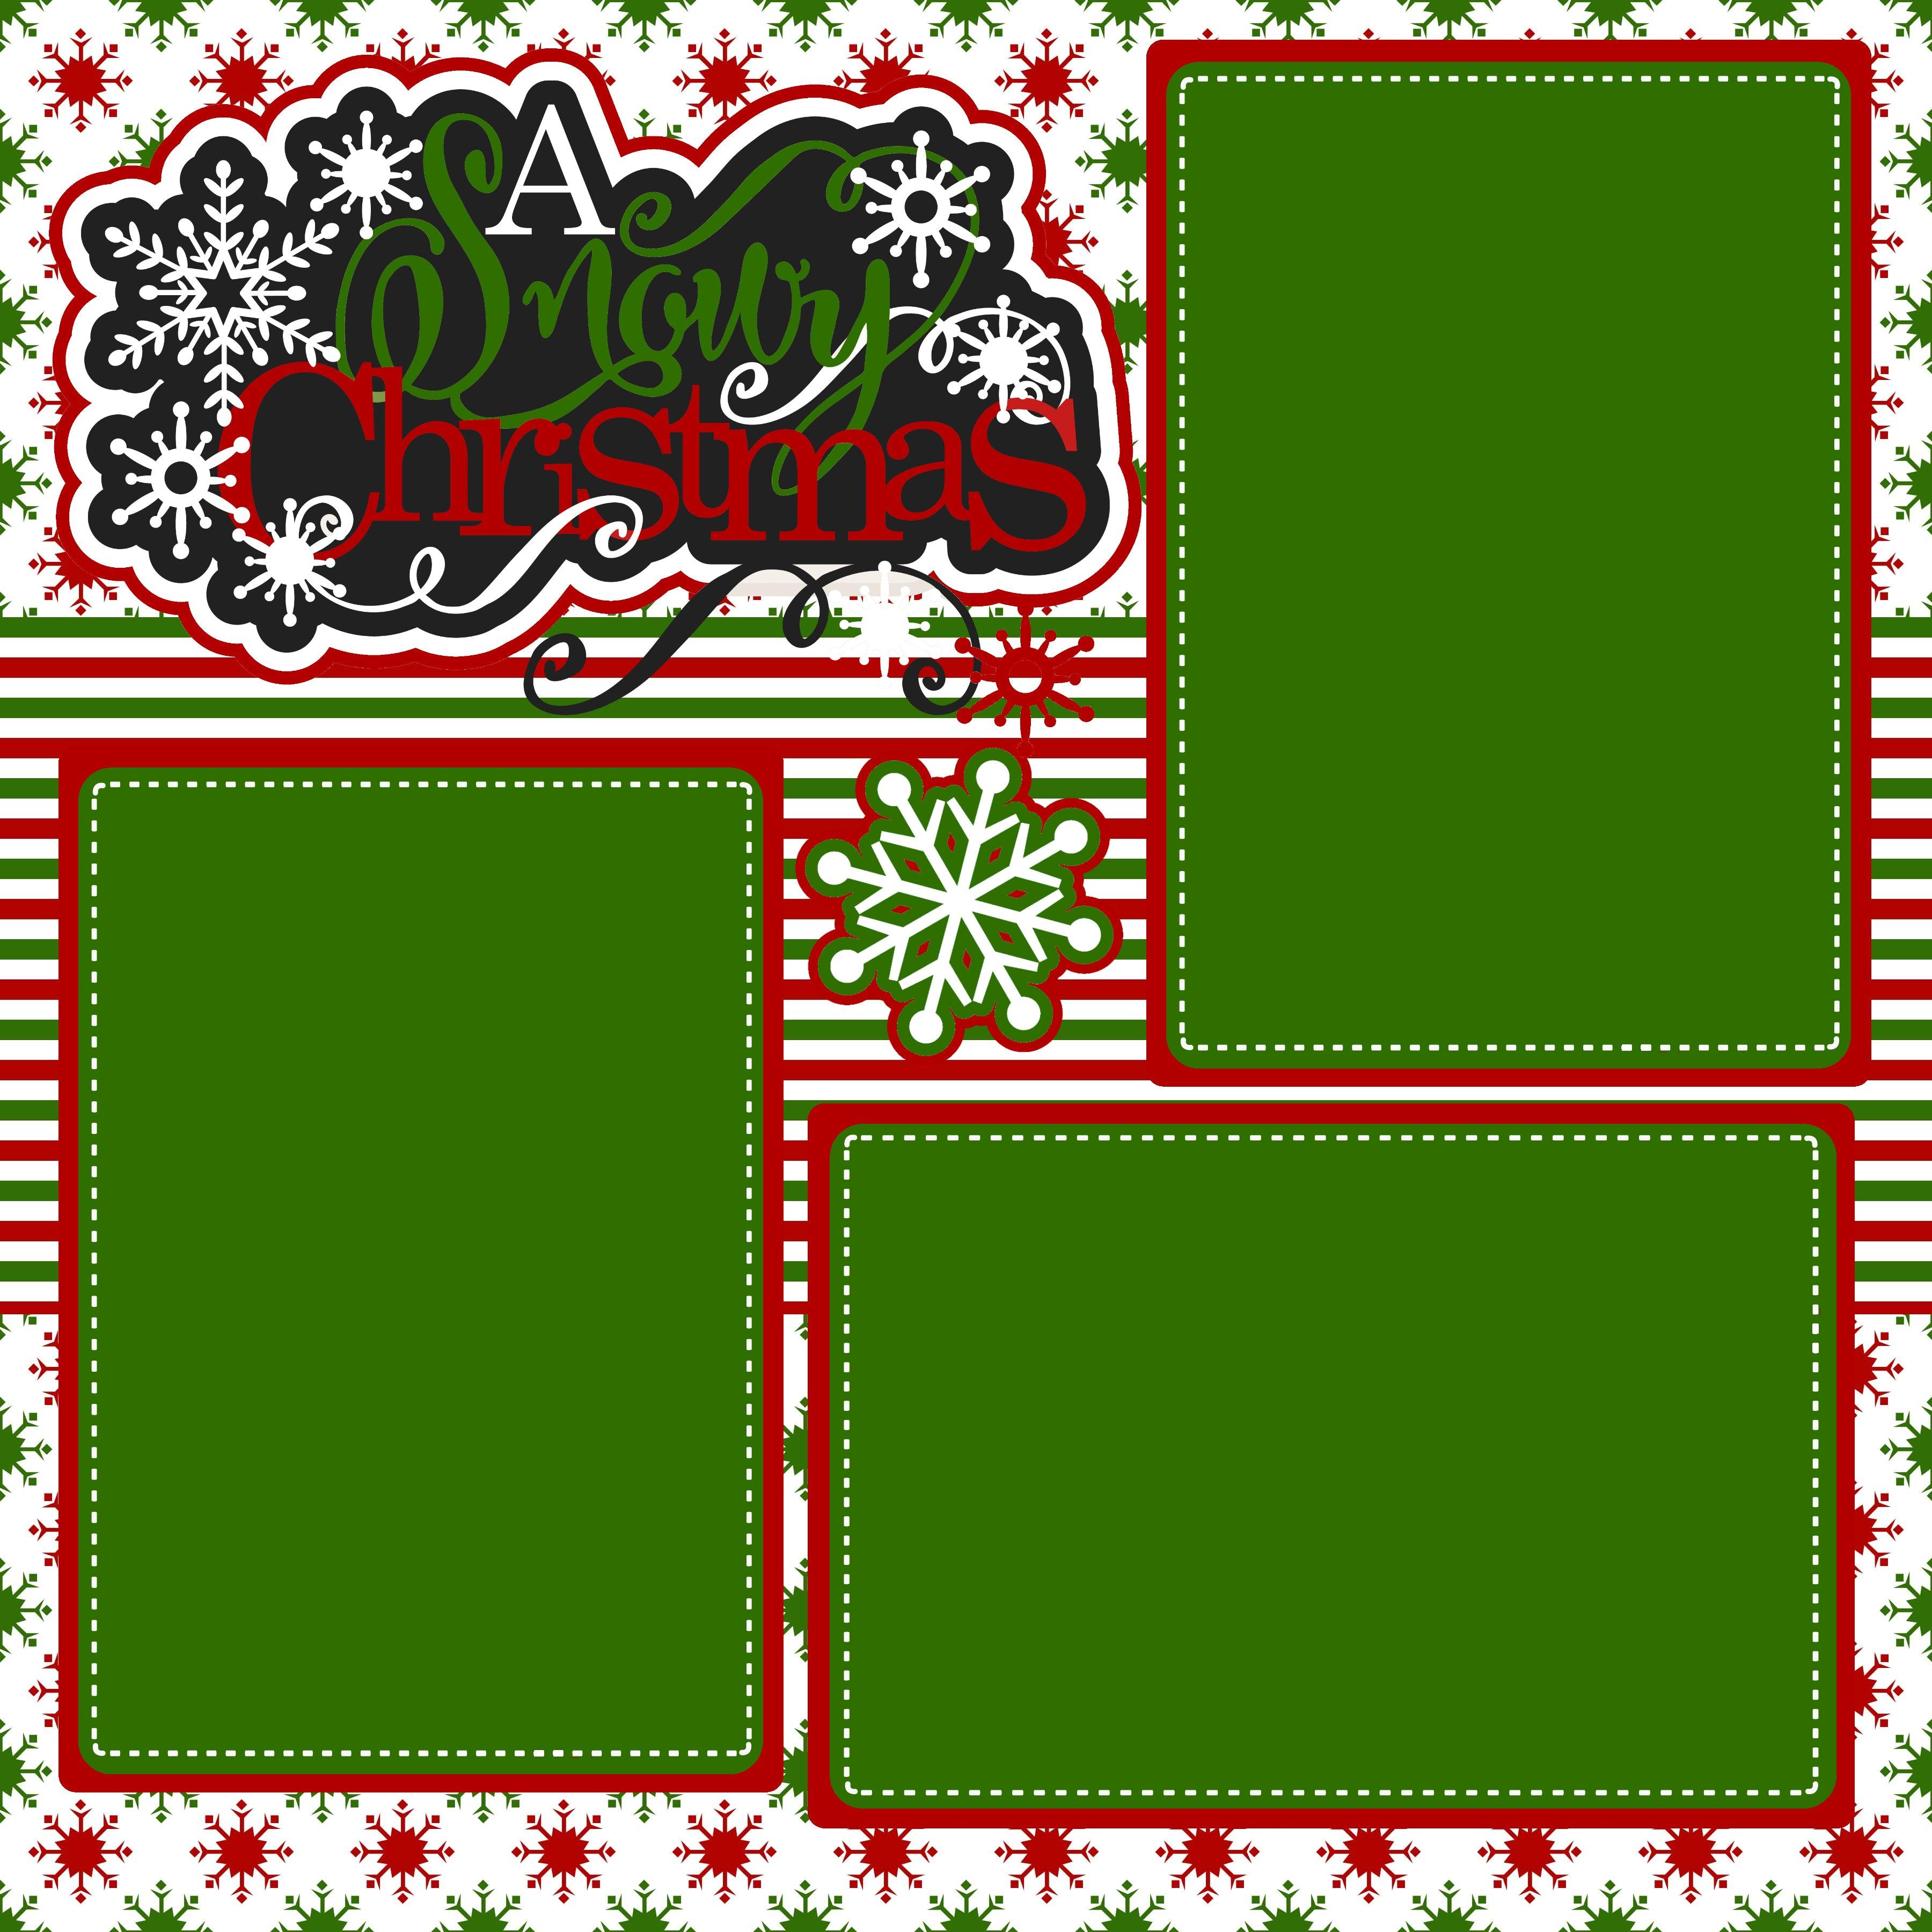 A Snowy Christmas (2) - 12 x 12 Premade, Printed Scrapbook Pages by SSC Designs - Scrapbook Supply Companies